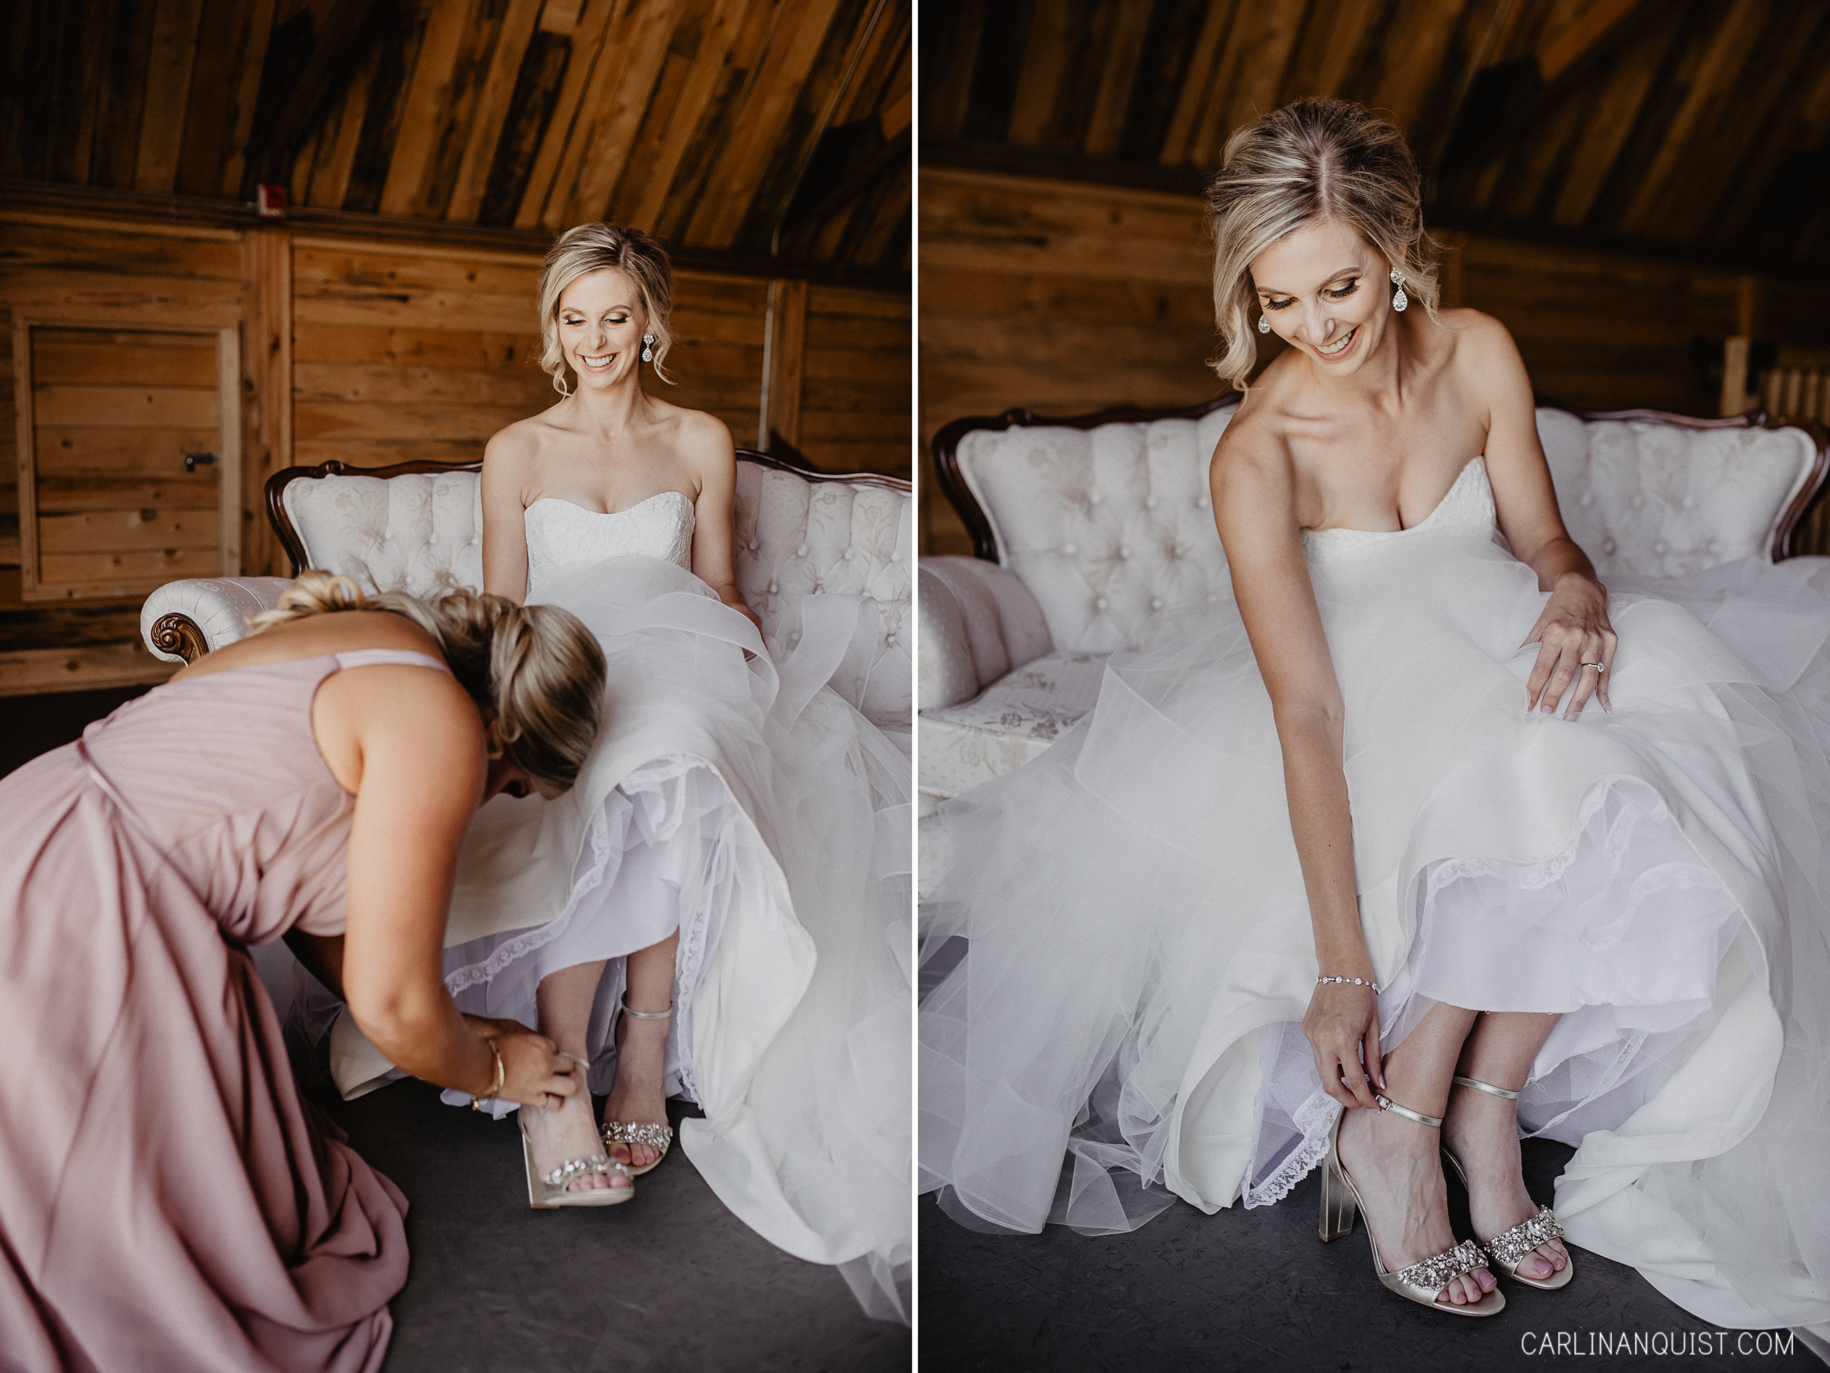 Bride Putting On Shoes